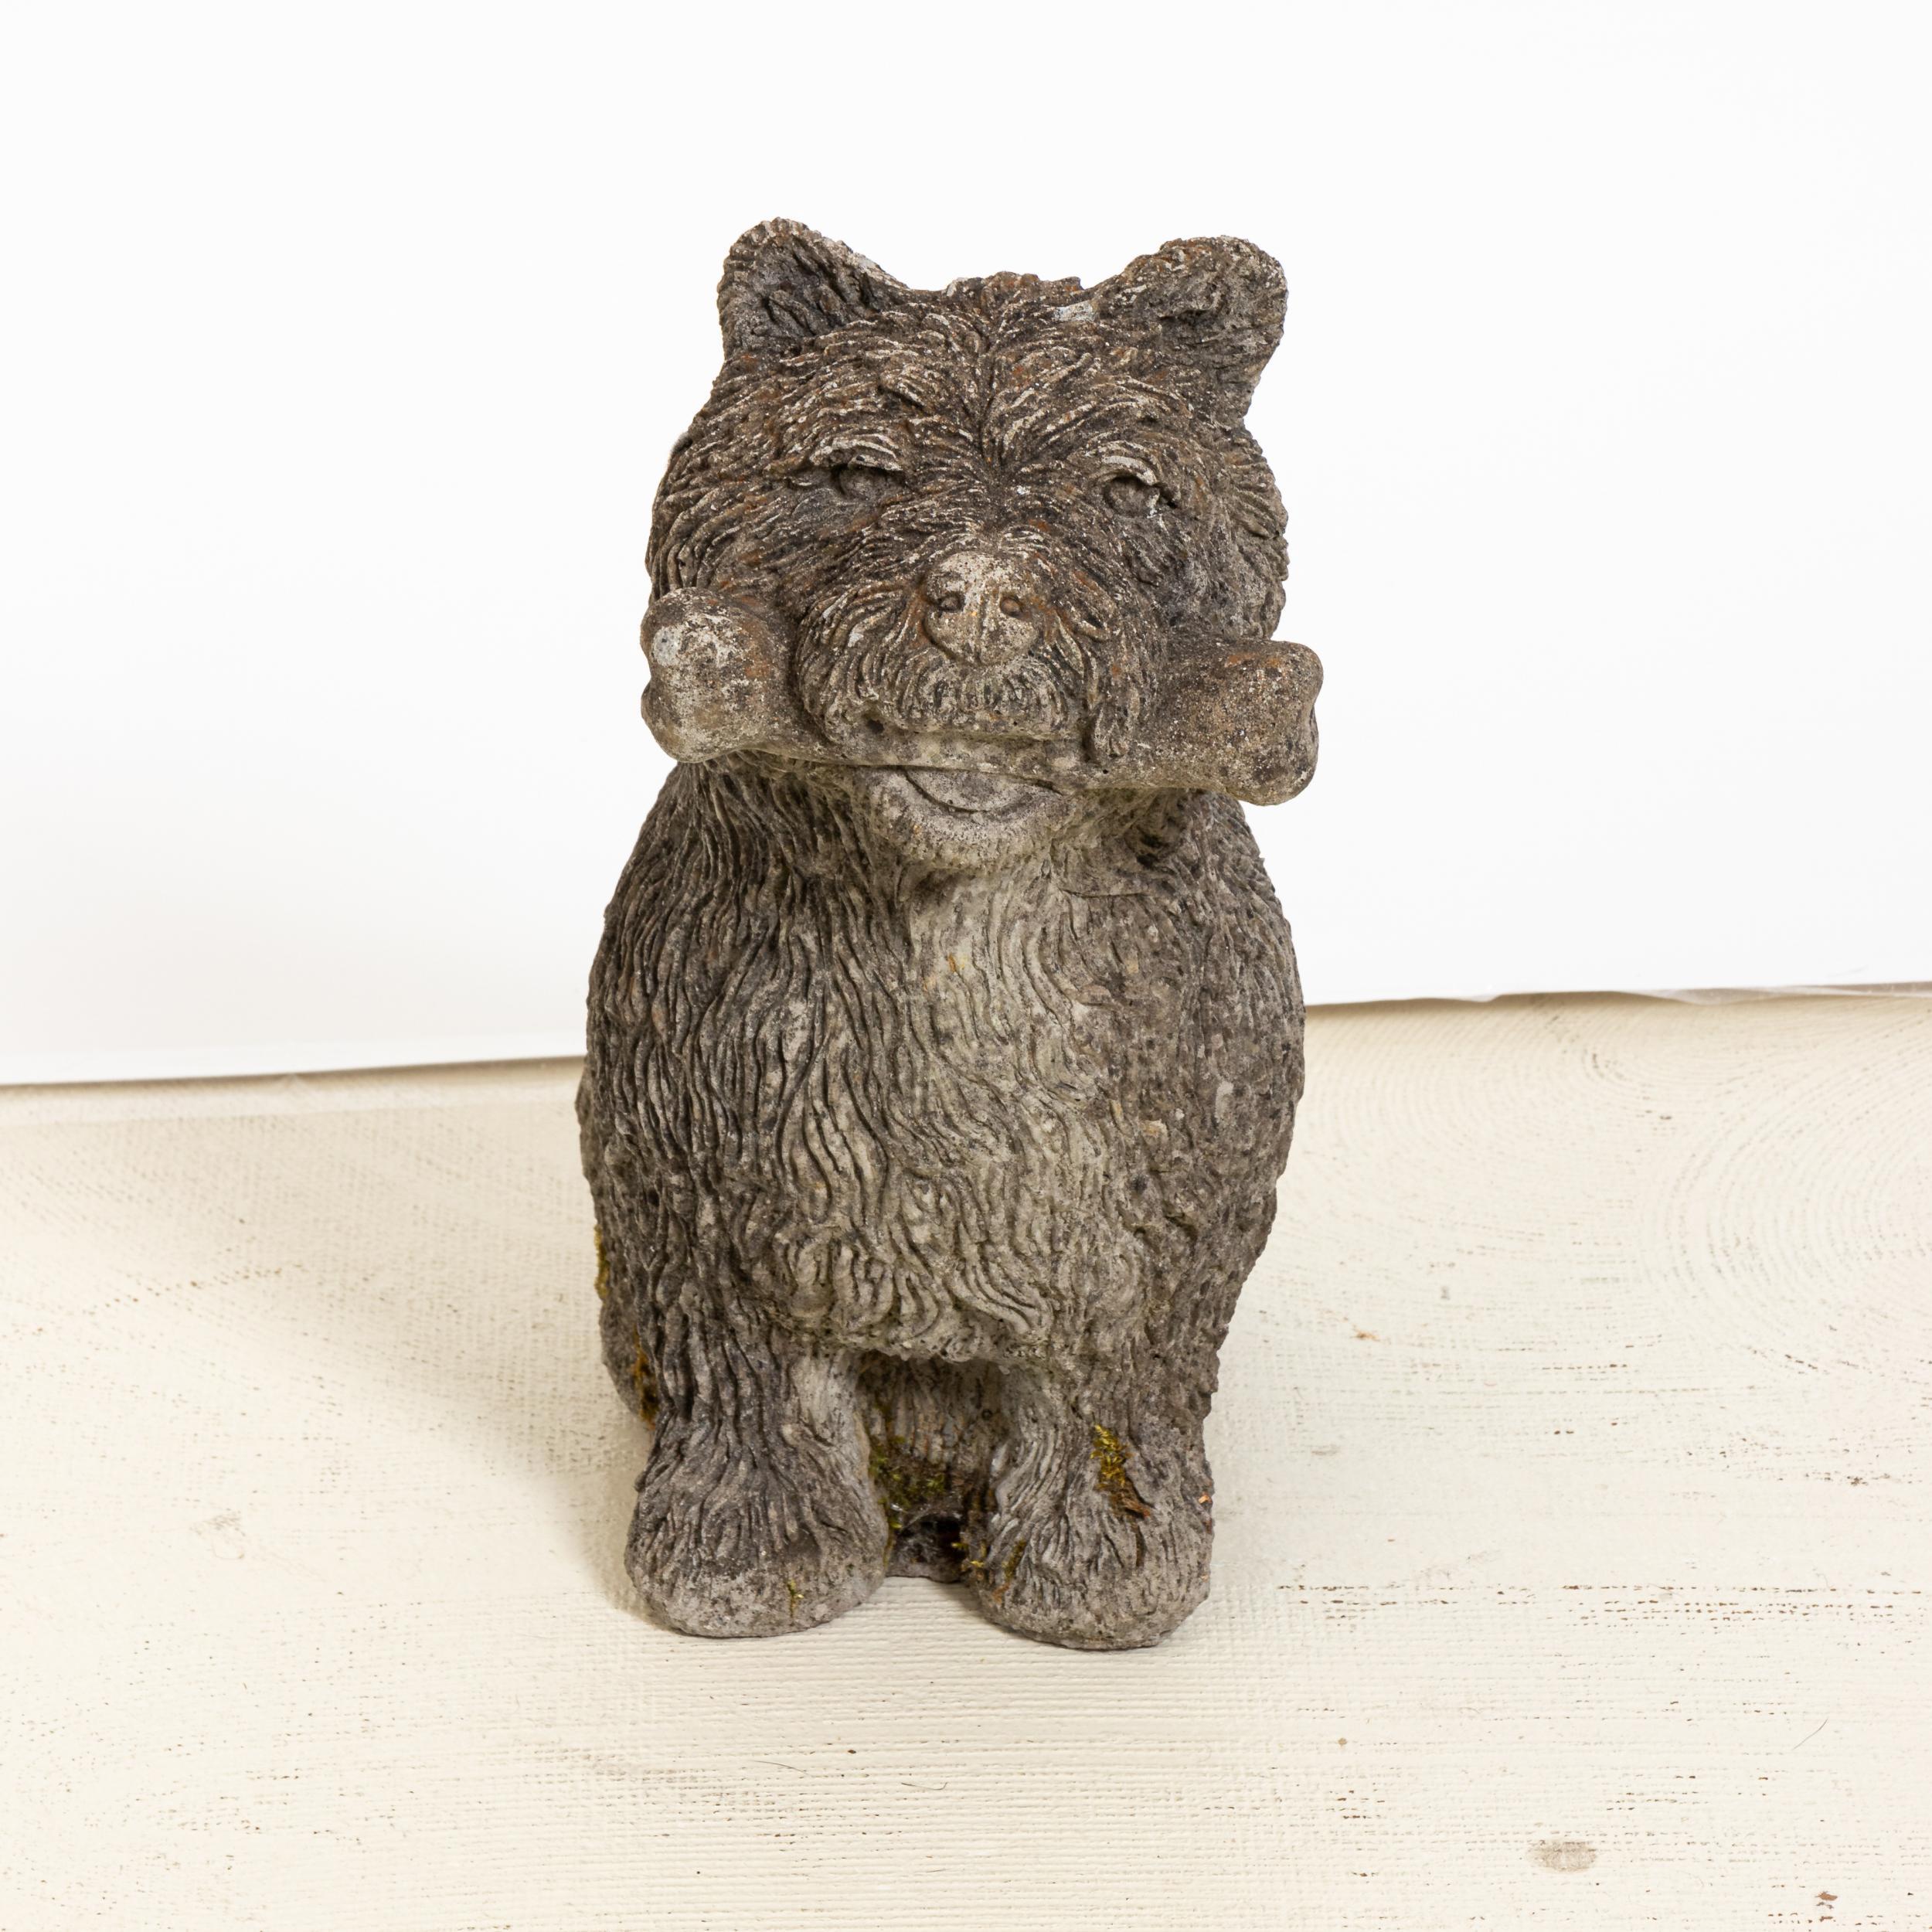 Unique cast stone garden statue in the shape of a Scottie dog holding a bone. Made in England in the early 20th century, this charming statue a playful element to add to the landscape. Good condition, weathered with age and exposure to the elements.